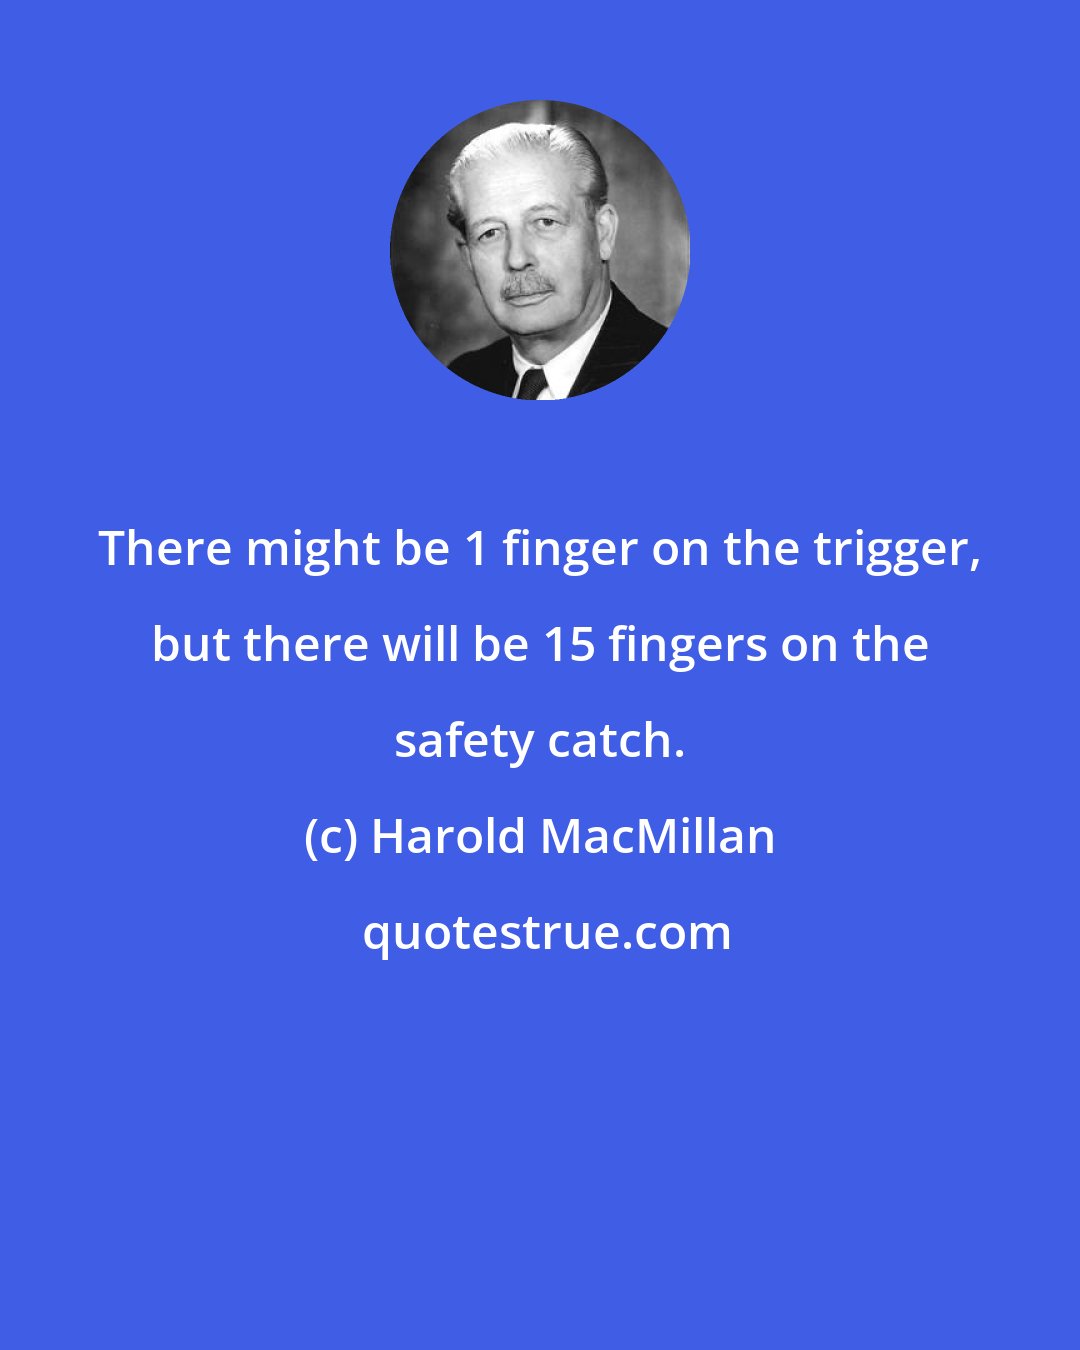 Harold MacMillan: There might be 1 finger on the trigger, but there will be 15 fingers on the safety catch.